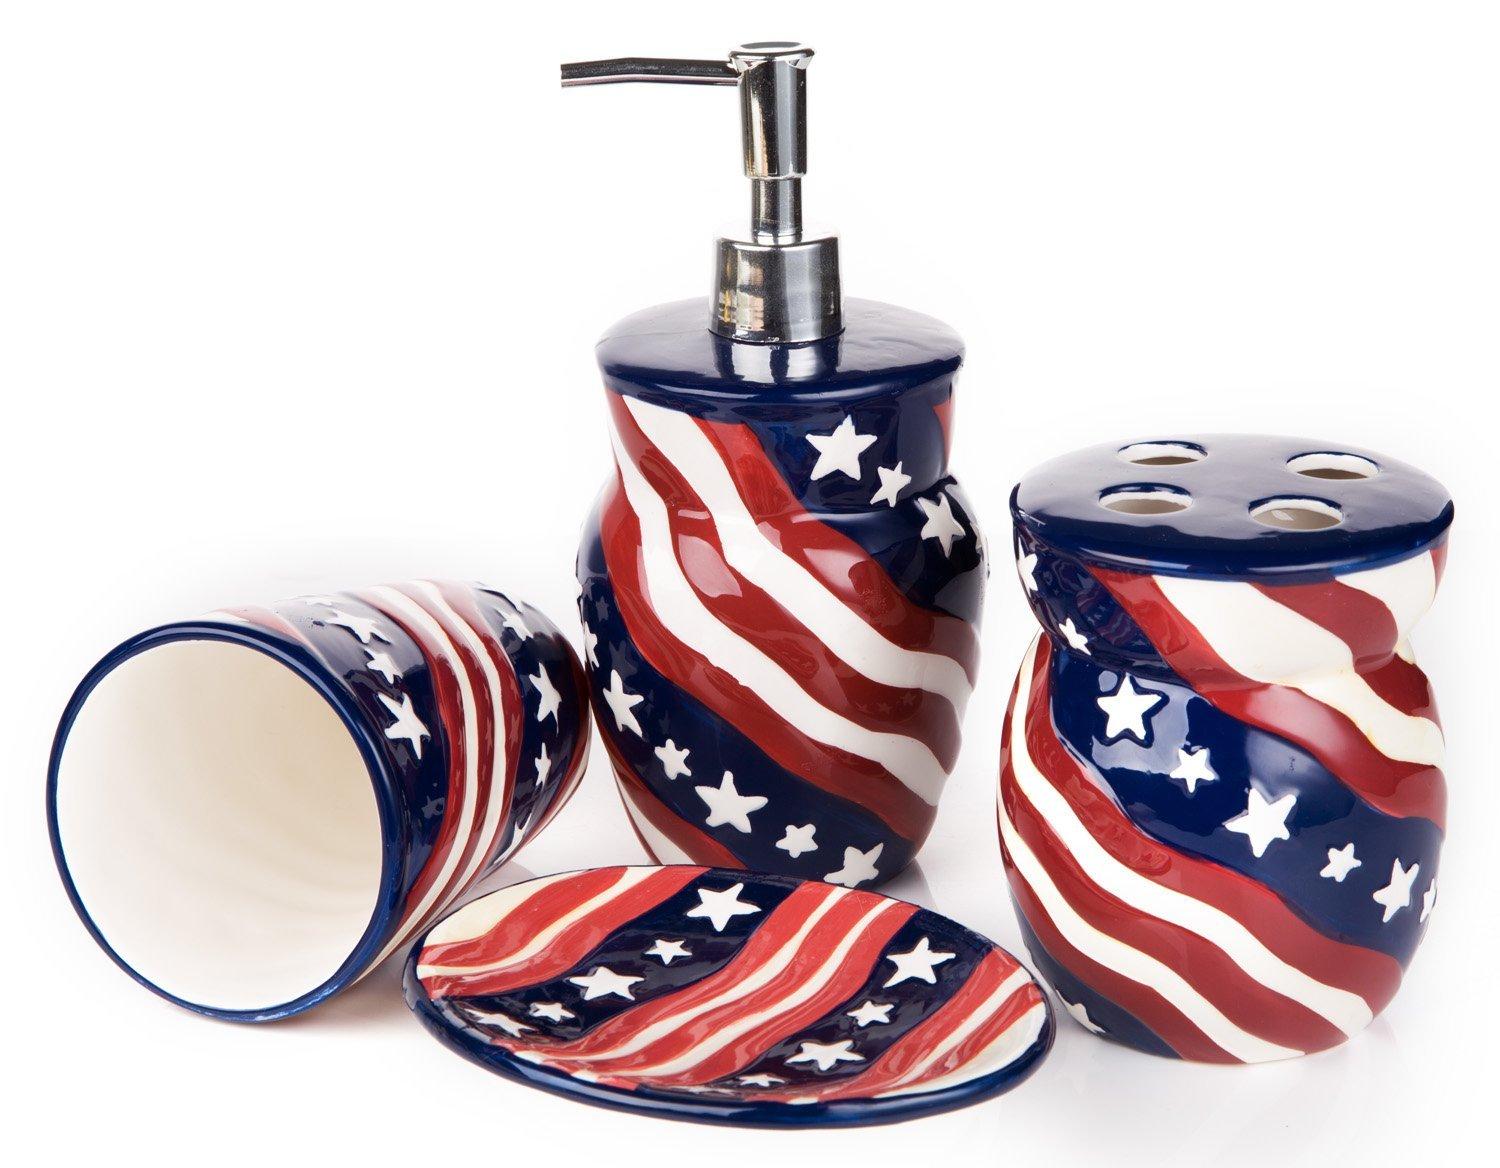 DIY: Decorate your Bathroom for Fourth-of-July